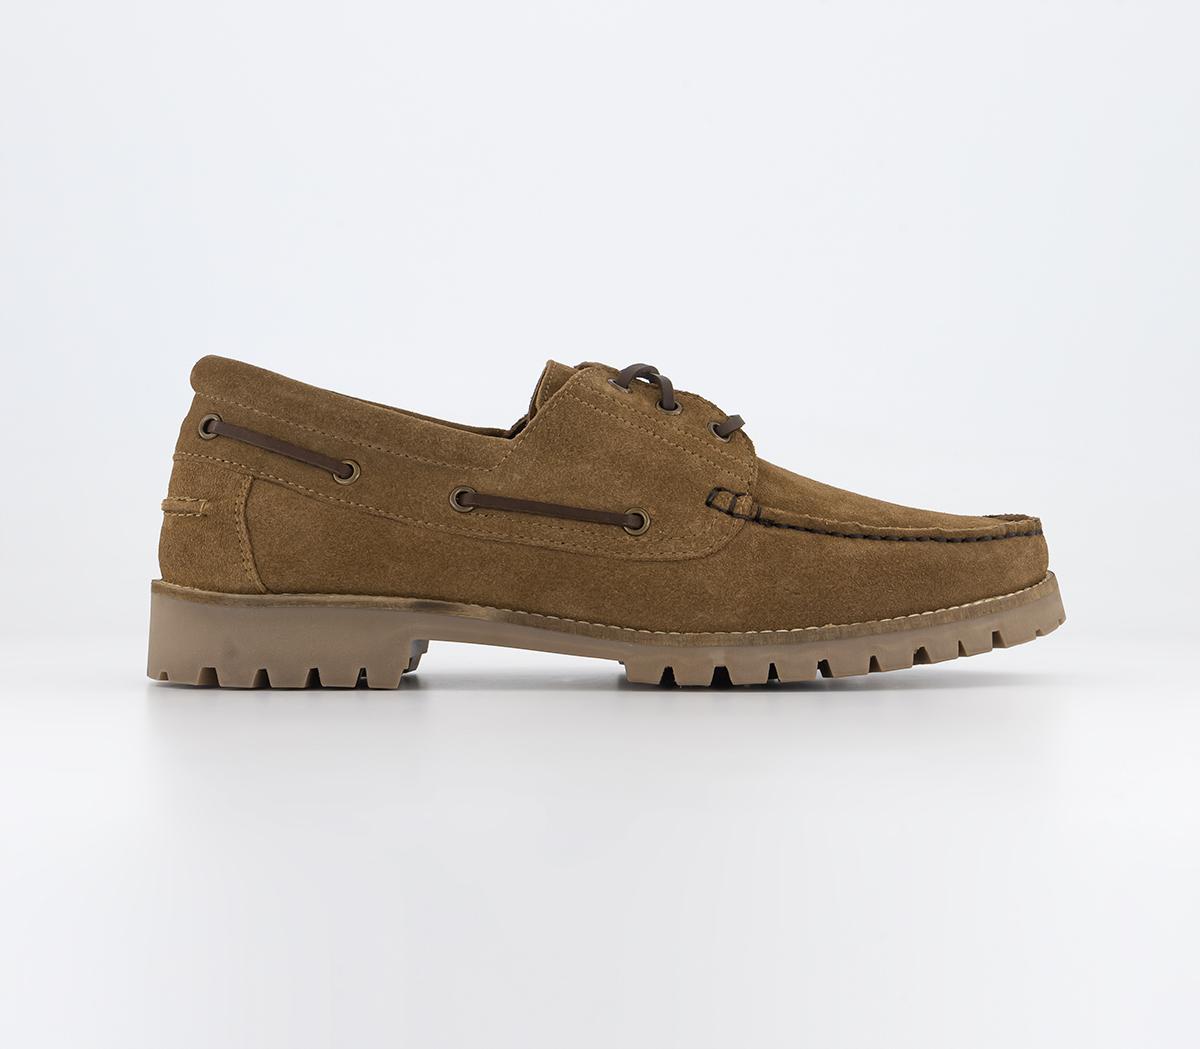 OFFICE Colorado Cleated Suede Boat Shoes Brown Suede - Men's Casual Shoes